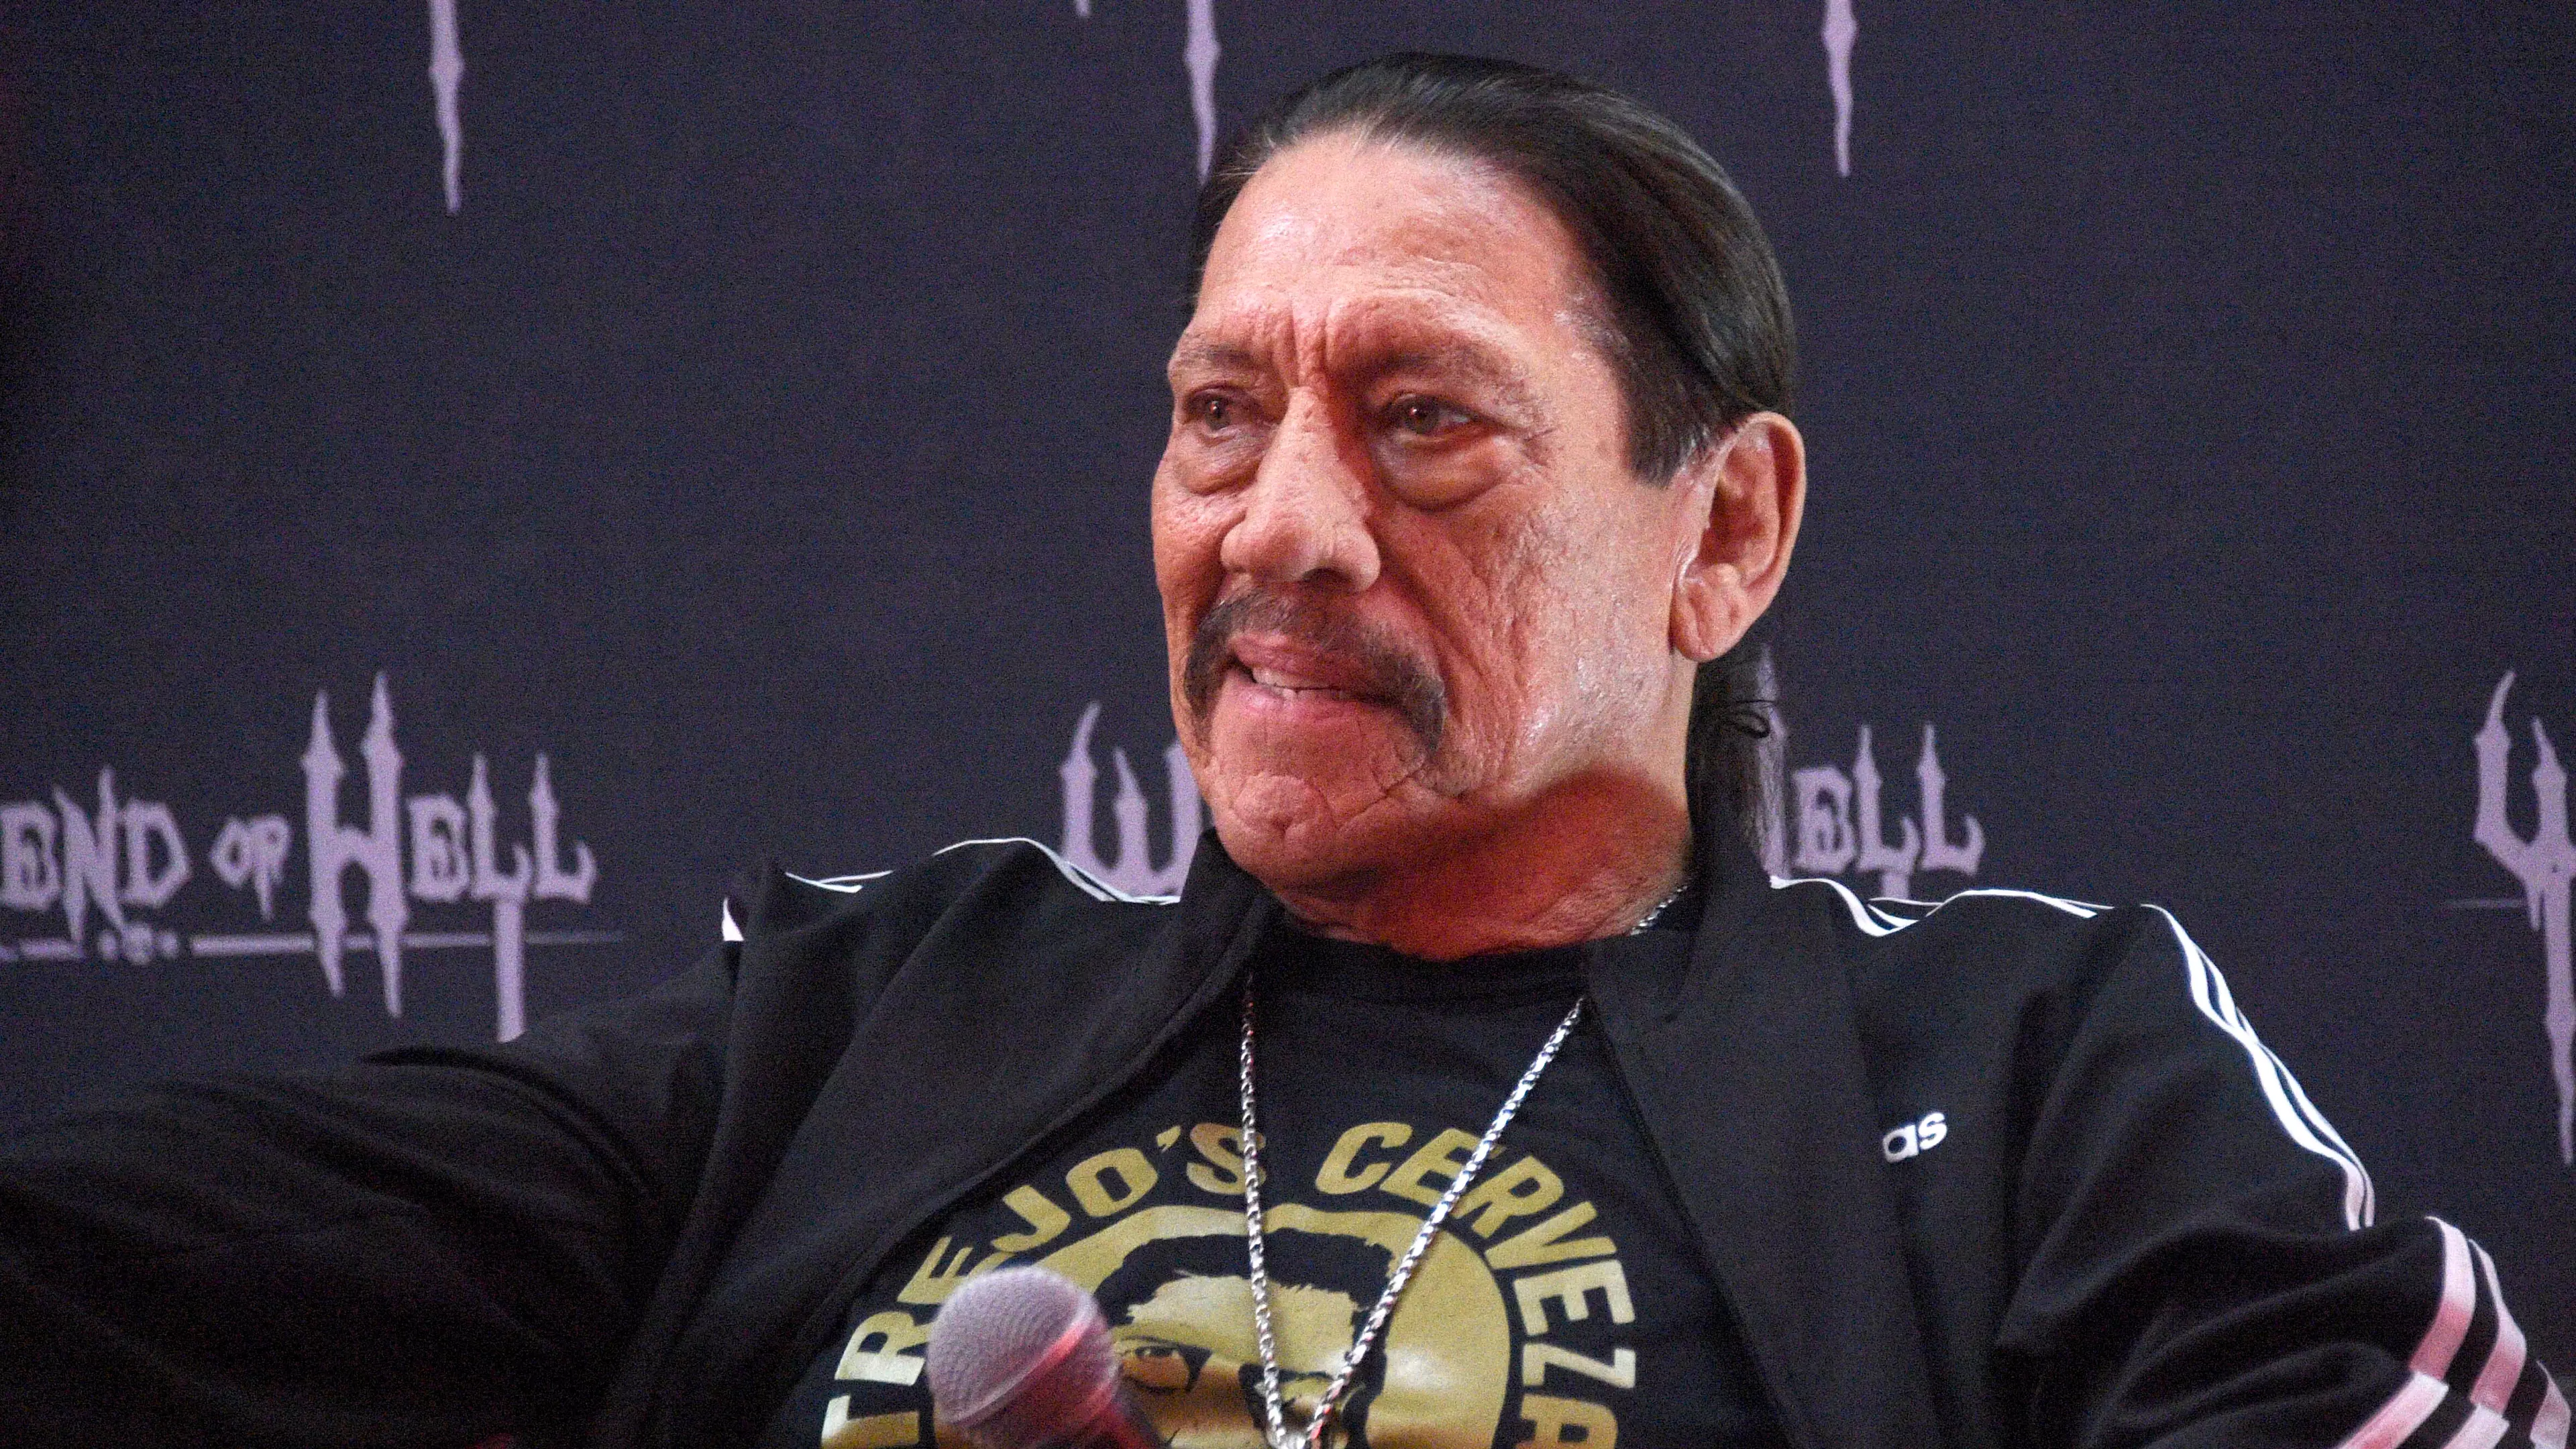 Danny Trejo Refused To Be Involved In Film About Mexican Prison Gangs